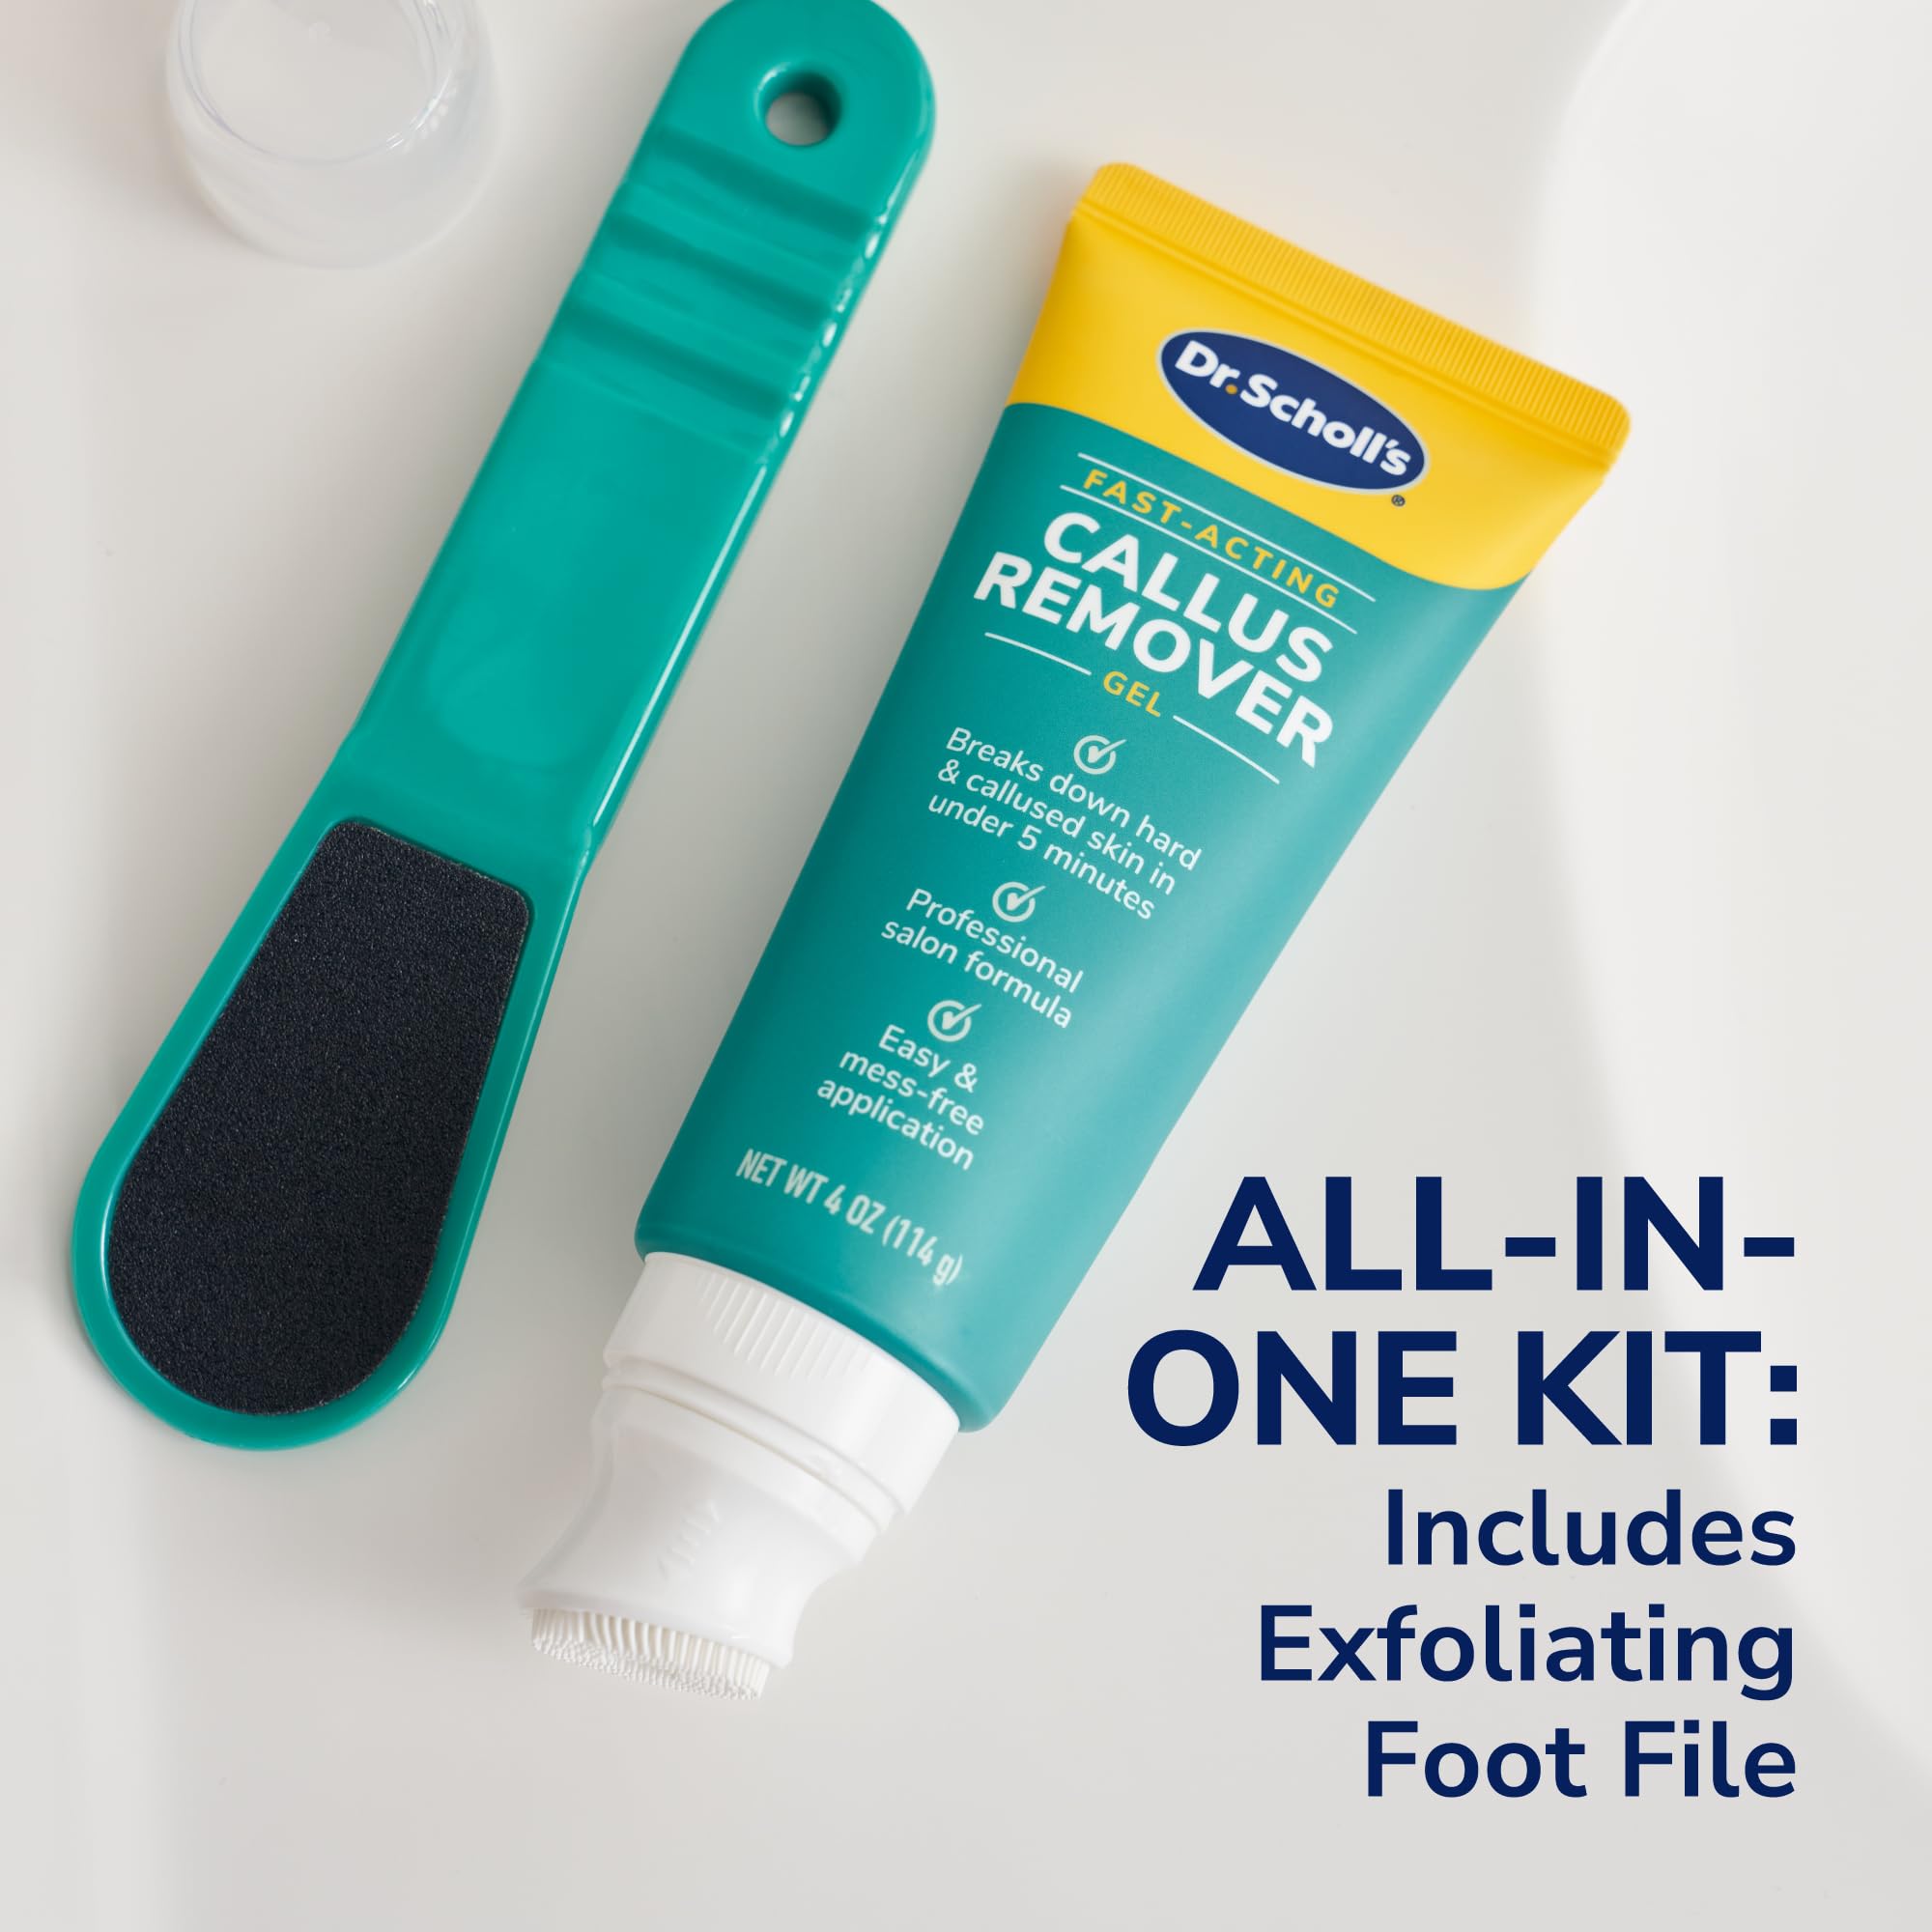 Dr. Scholl's Fast Acting Callus Remover Gel Kit, Hard Skin Removal, Smooth Soft Feet in Minutes, Salon Professional Formula, Mess Free Application, Exfoliating Foot File Pedicure Tool Included